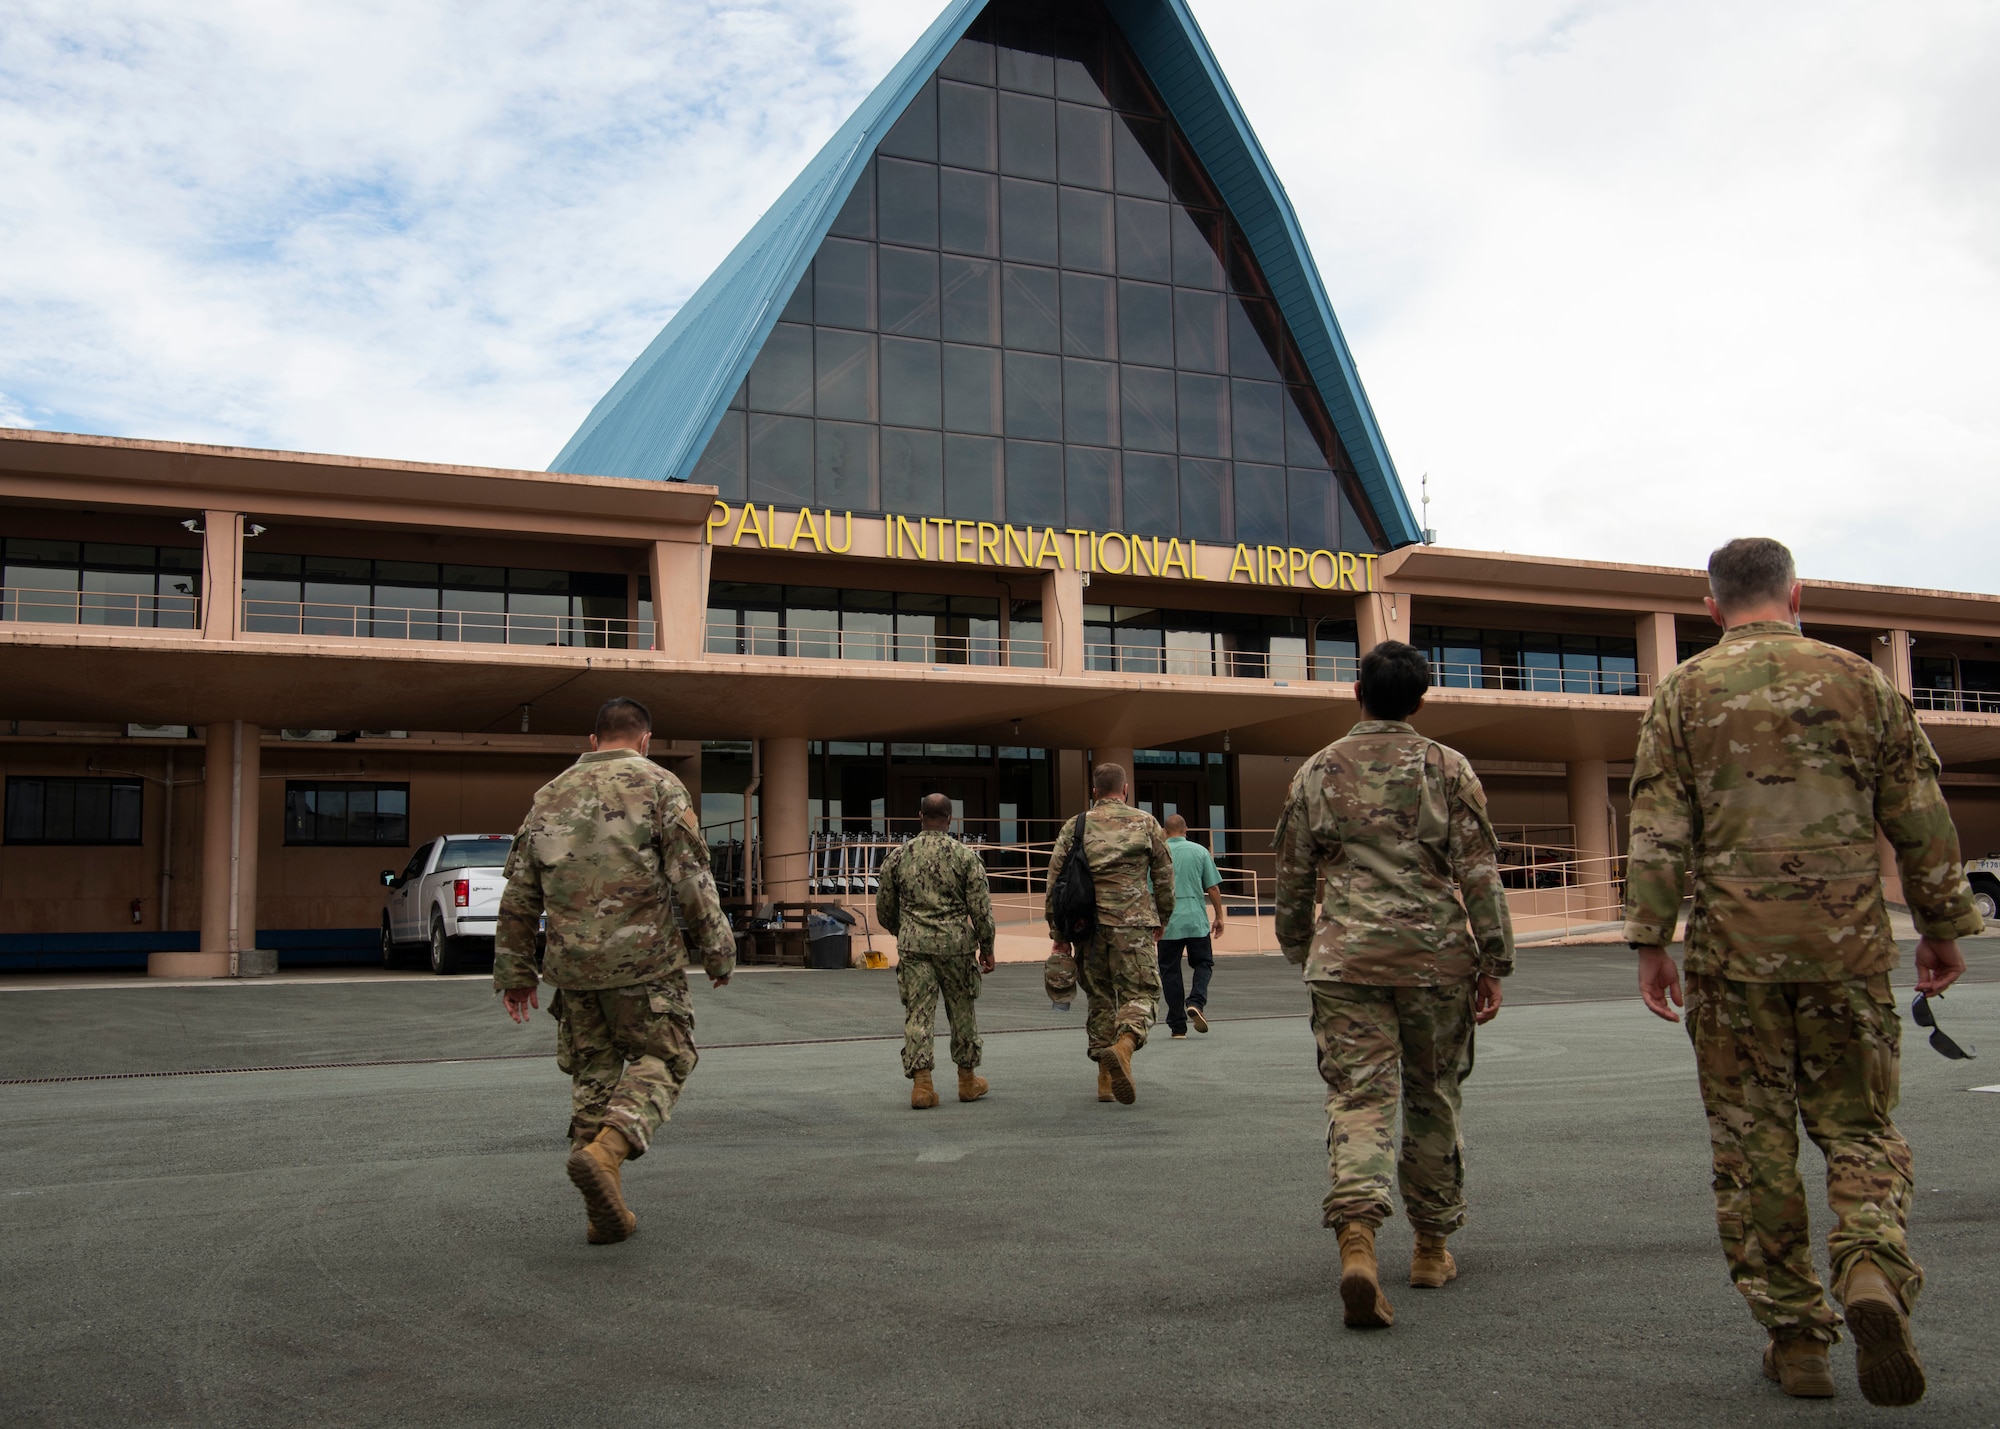 U.S. Air Force members from the 36th Contingency Response Squadron enter Palau National Airport after arriving on island for a key leader engagement, June 23, 2021. The purpose of the visit was for the commander of the 36th CRG, to meet with key leaders of Palau such as the ambassador, national security office coordinator, two governors, and to go on a walkthrough of some of the sites where his members are conducting training. (U.S. Air Force photo by Senior Airman Aubree Owens)